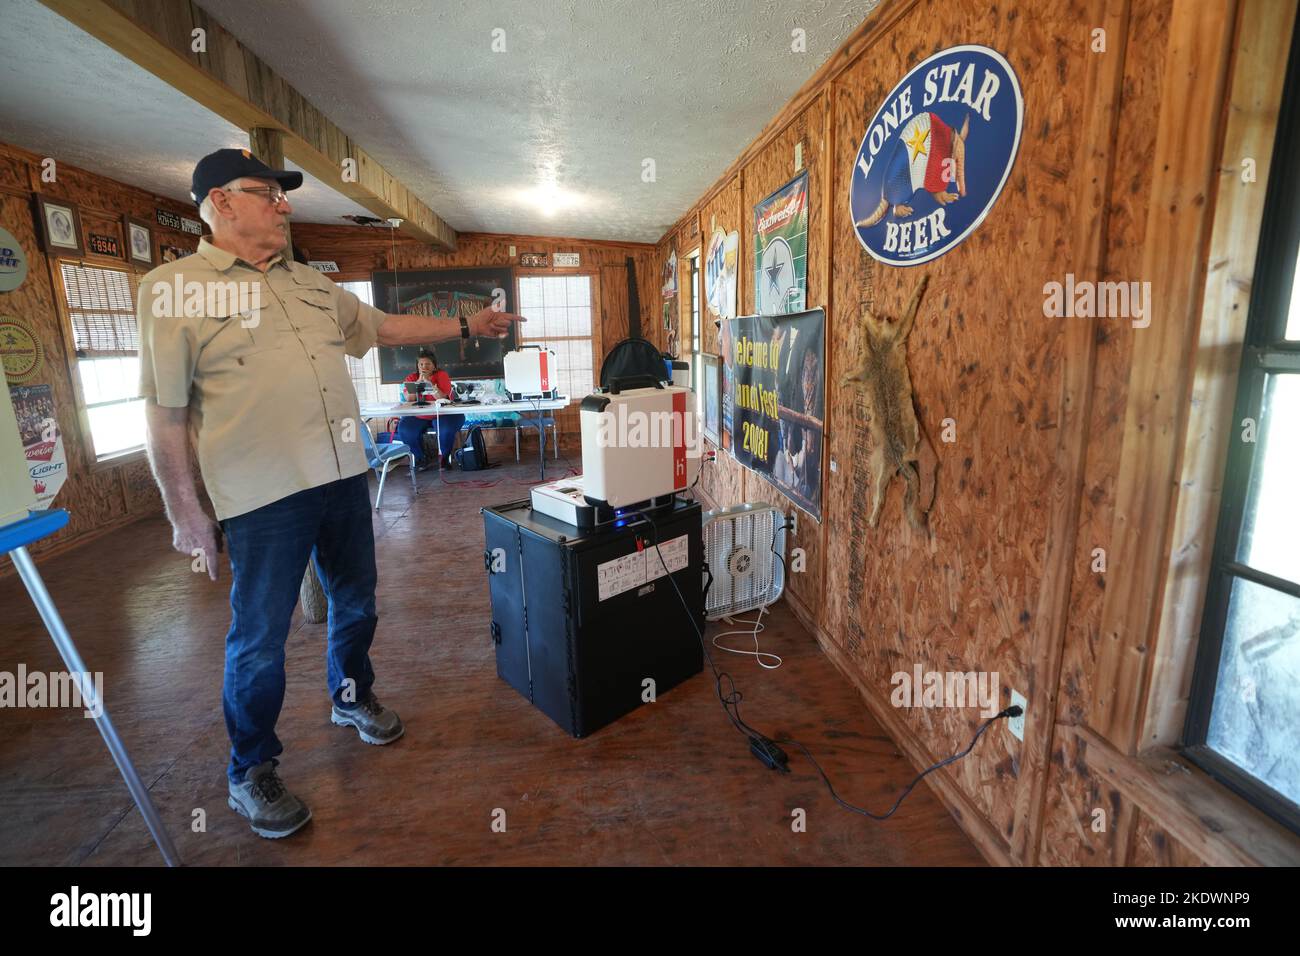 Live Oak County Texas USA, November 8 2022: Election Judge PHILLIP STORM points to a coyote skin on the wall as he waits in the old barbecue joint Ray's outside of Alice, Texas, for voters to arrive during the midterm elections in rural south Texas. The business has been closed about 15 years and is used regularly as a rural polling place. Credit: Bob Daemmrich/Alamy Live News Stock Photo